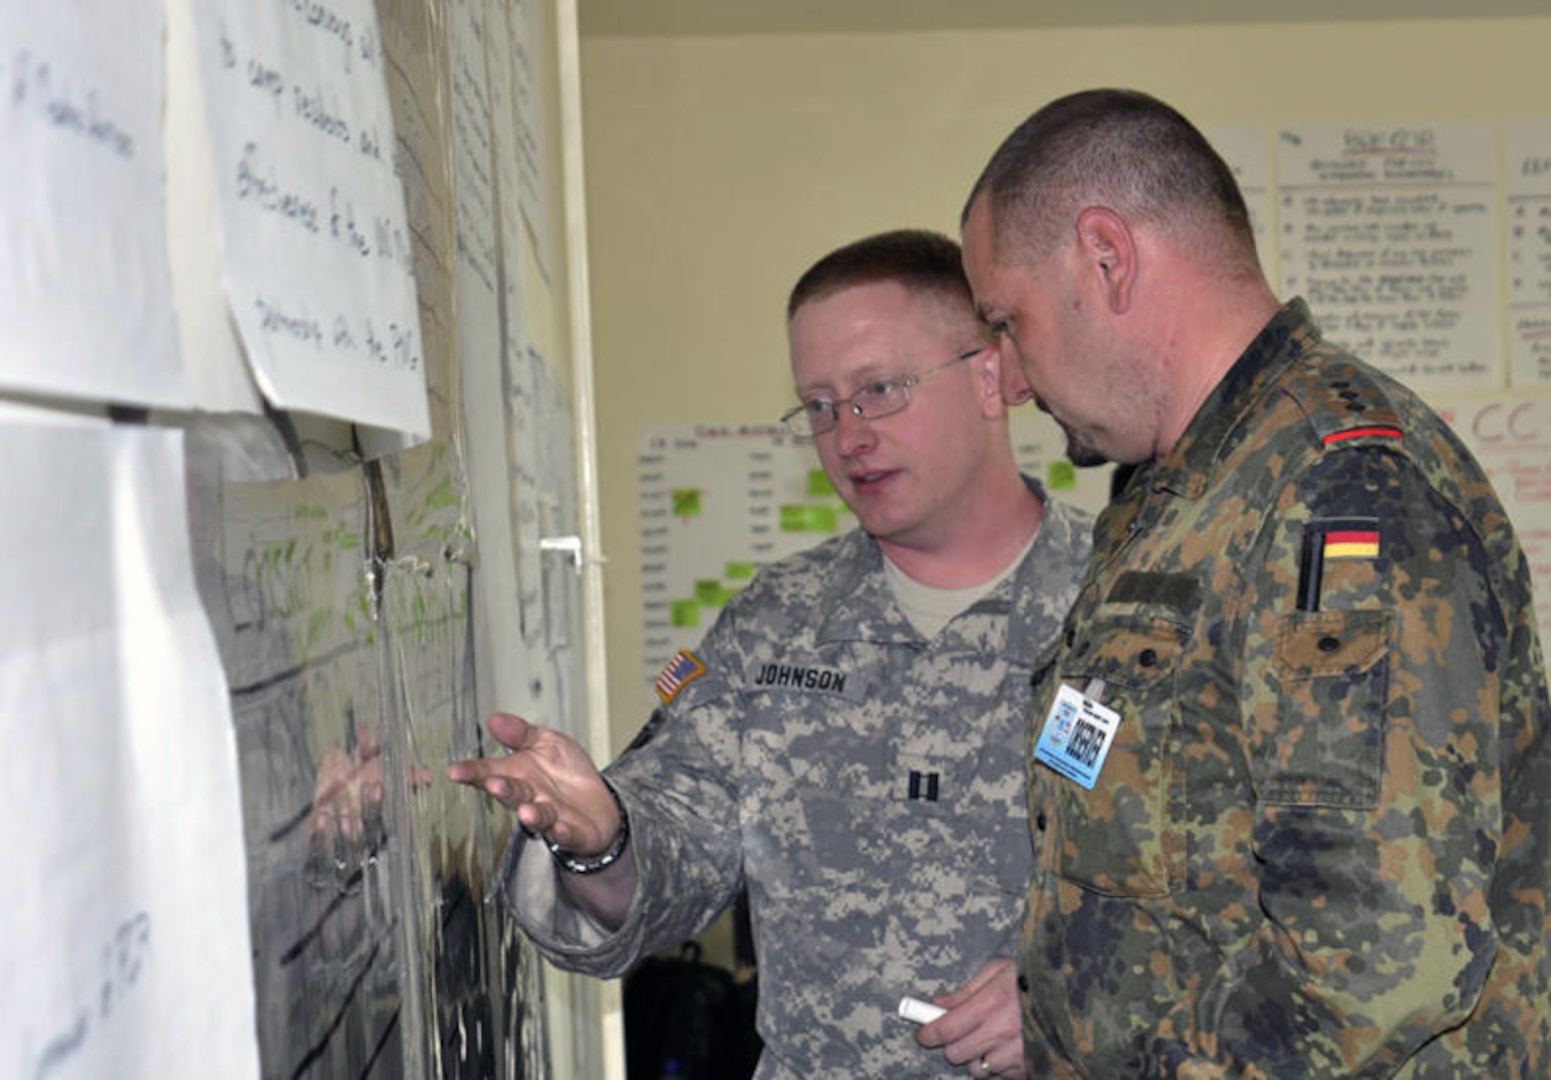 Capt. James Johnson, 761st Military Police Battalion of the Alaska National Guard, discusses logistics with Capt. Michael Moller, Khaan Quest 2010 exercise observer from the German armed forces, in the Battalion Tactical Operations Center at Five Hills Training Area, Mongolia, Aug 16, 2010. Moller is one of several observers from countries in the surrounding area. 